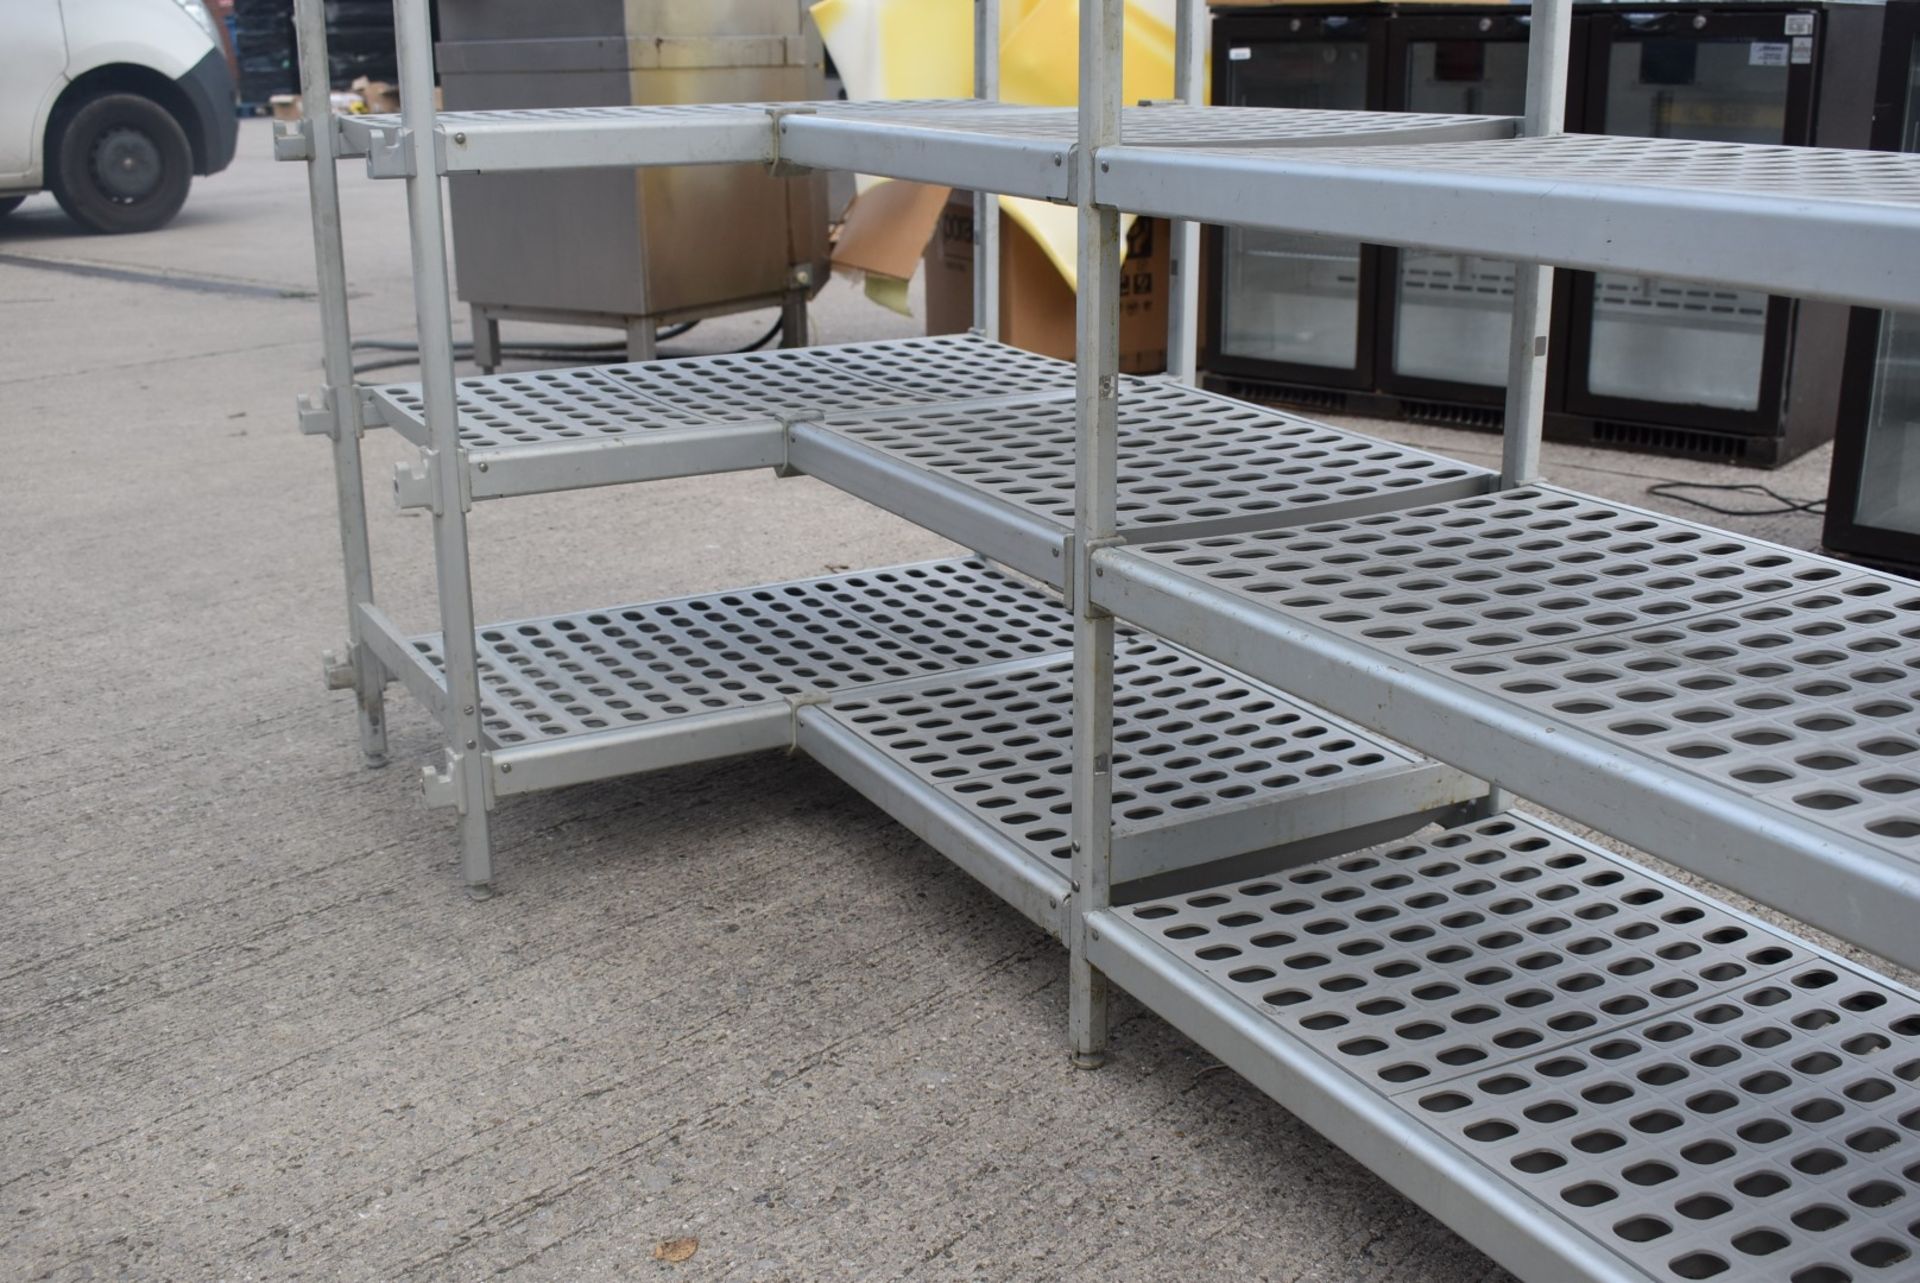 1 x Cold Room L Shaped Shelving Unit With Aluminium Frame and Perforated Shelf Panels - Image 7 of 8